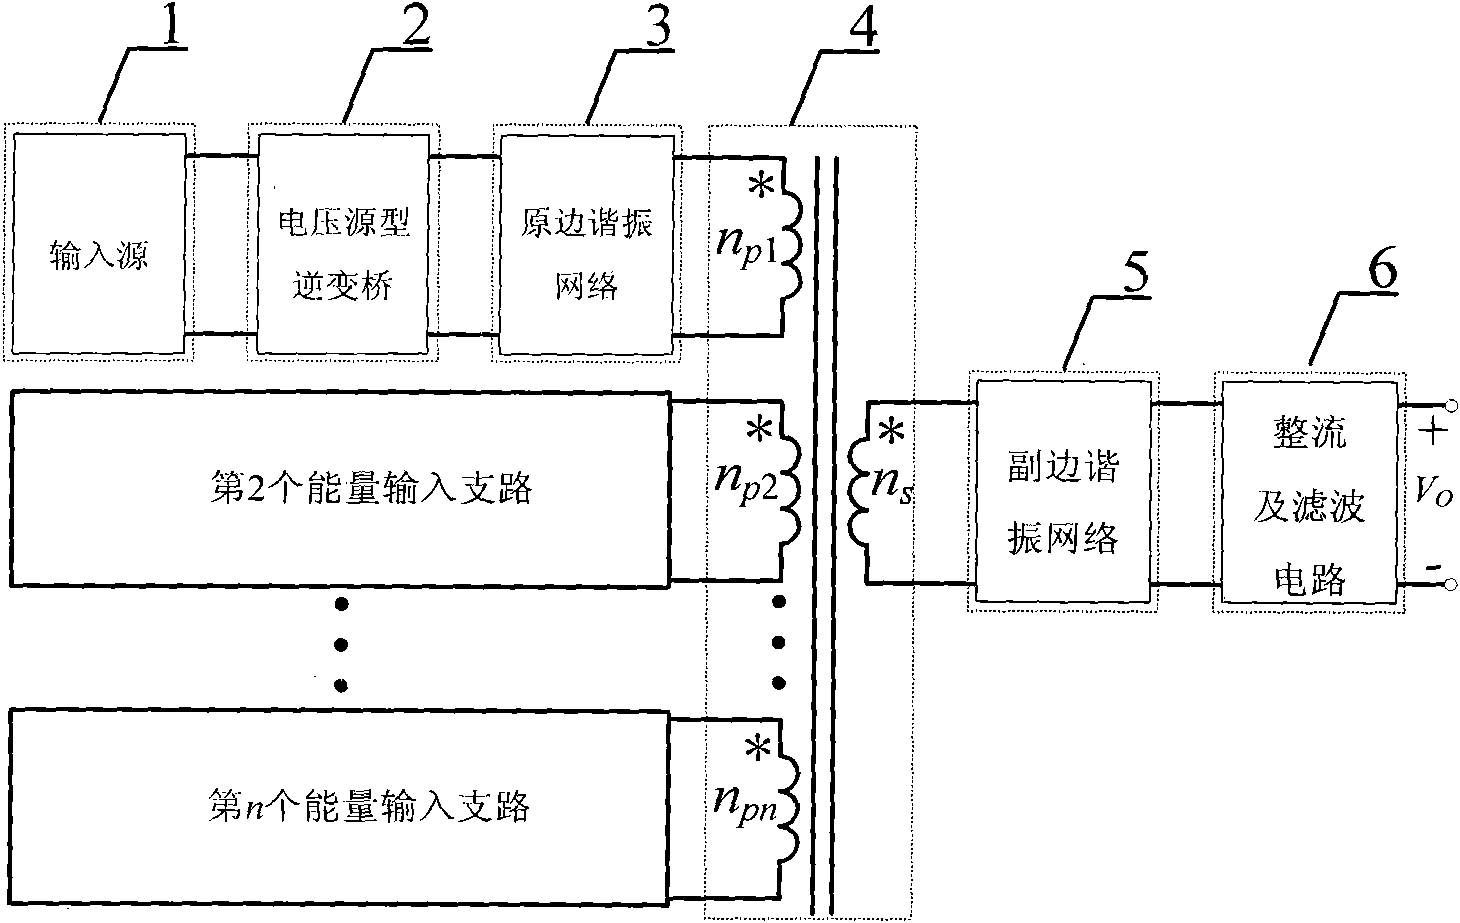 Non-contact multiple input voltage source type resonant converter